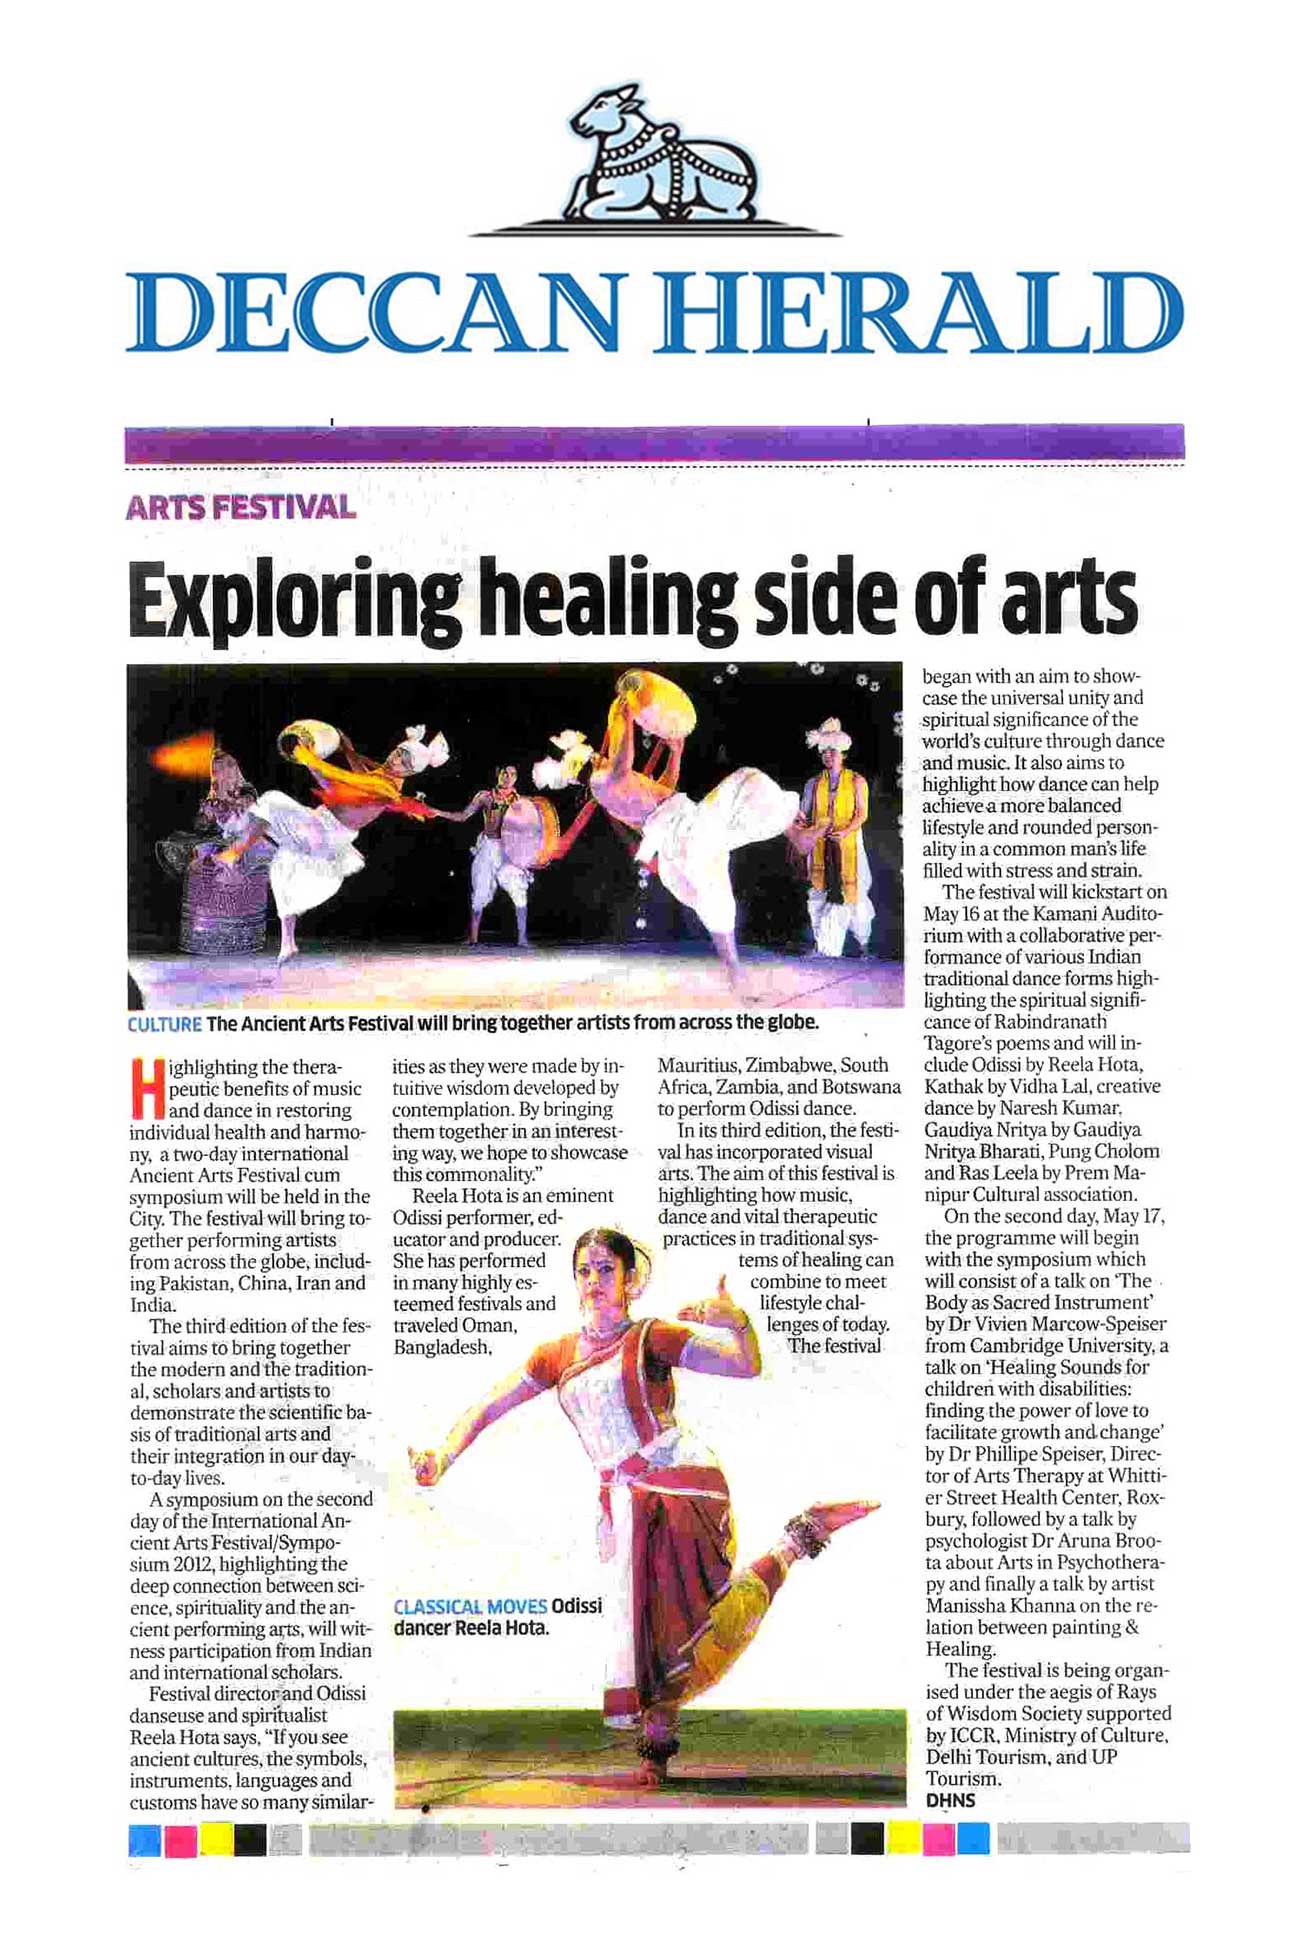 2012 may, 15: The Deccan Herald